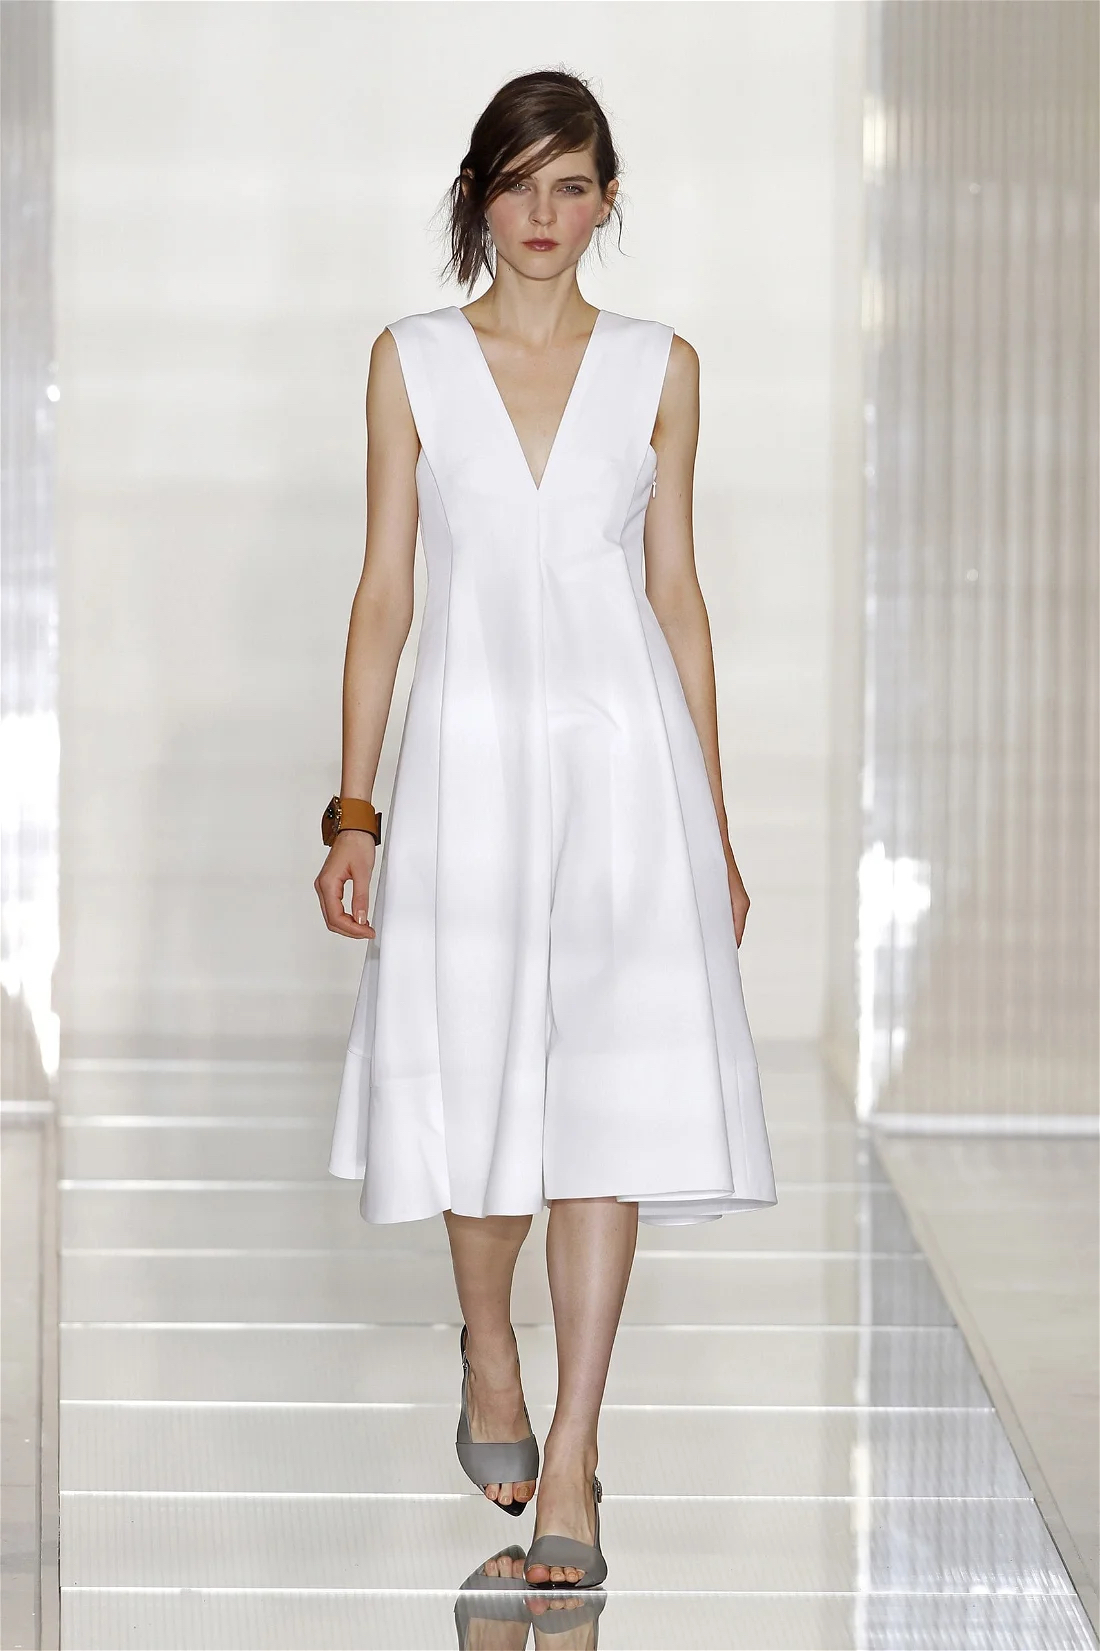 TWO MARNI DRESSES IN OFF-WHITE AND BLACK - Image 3 of 6